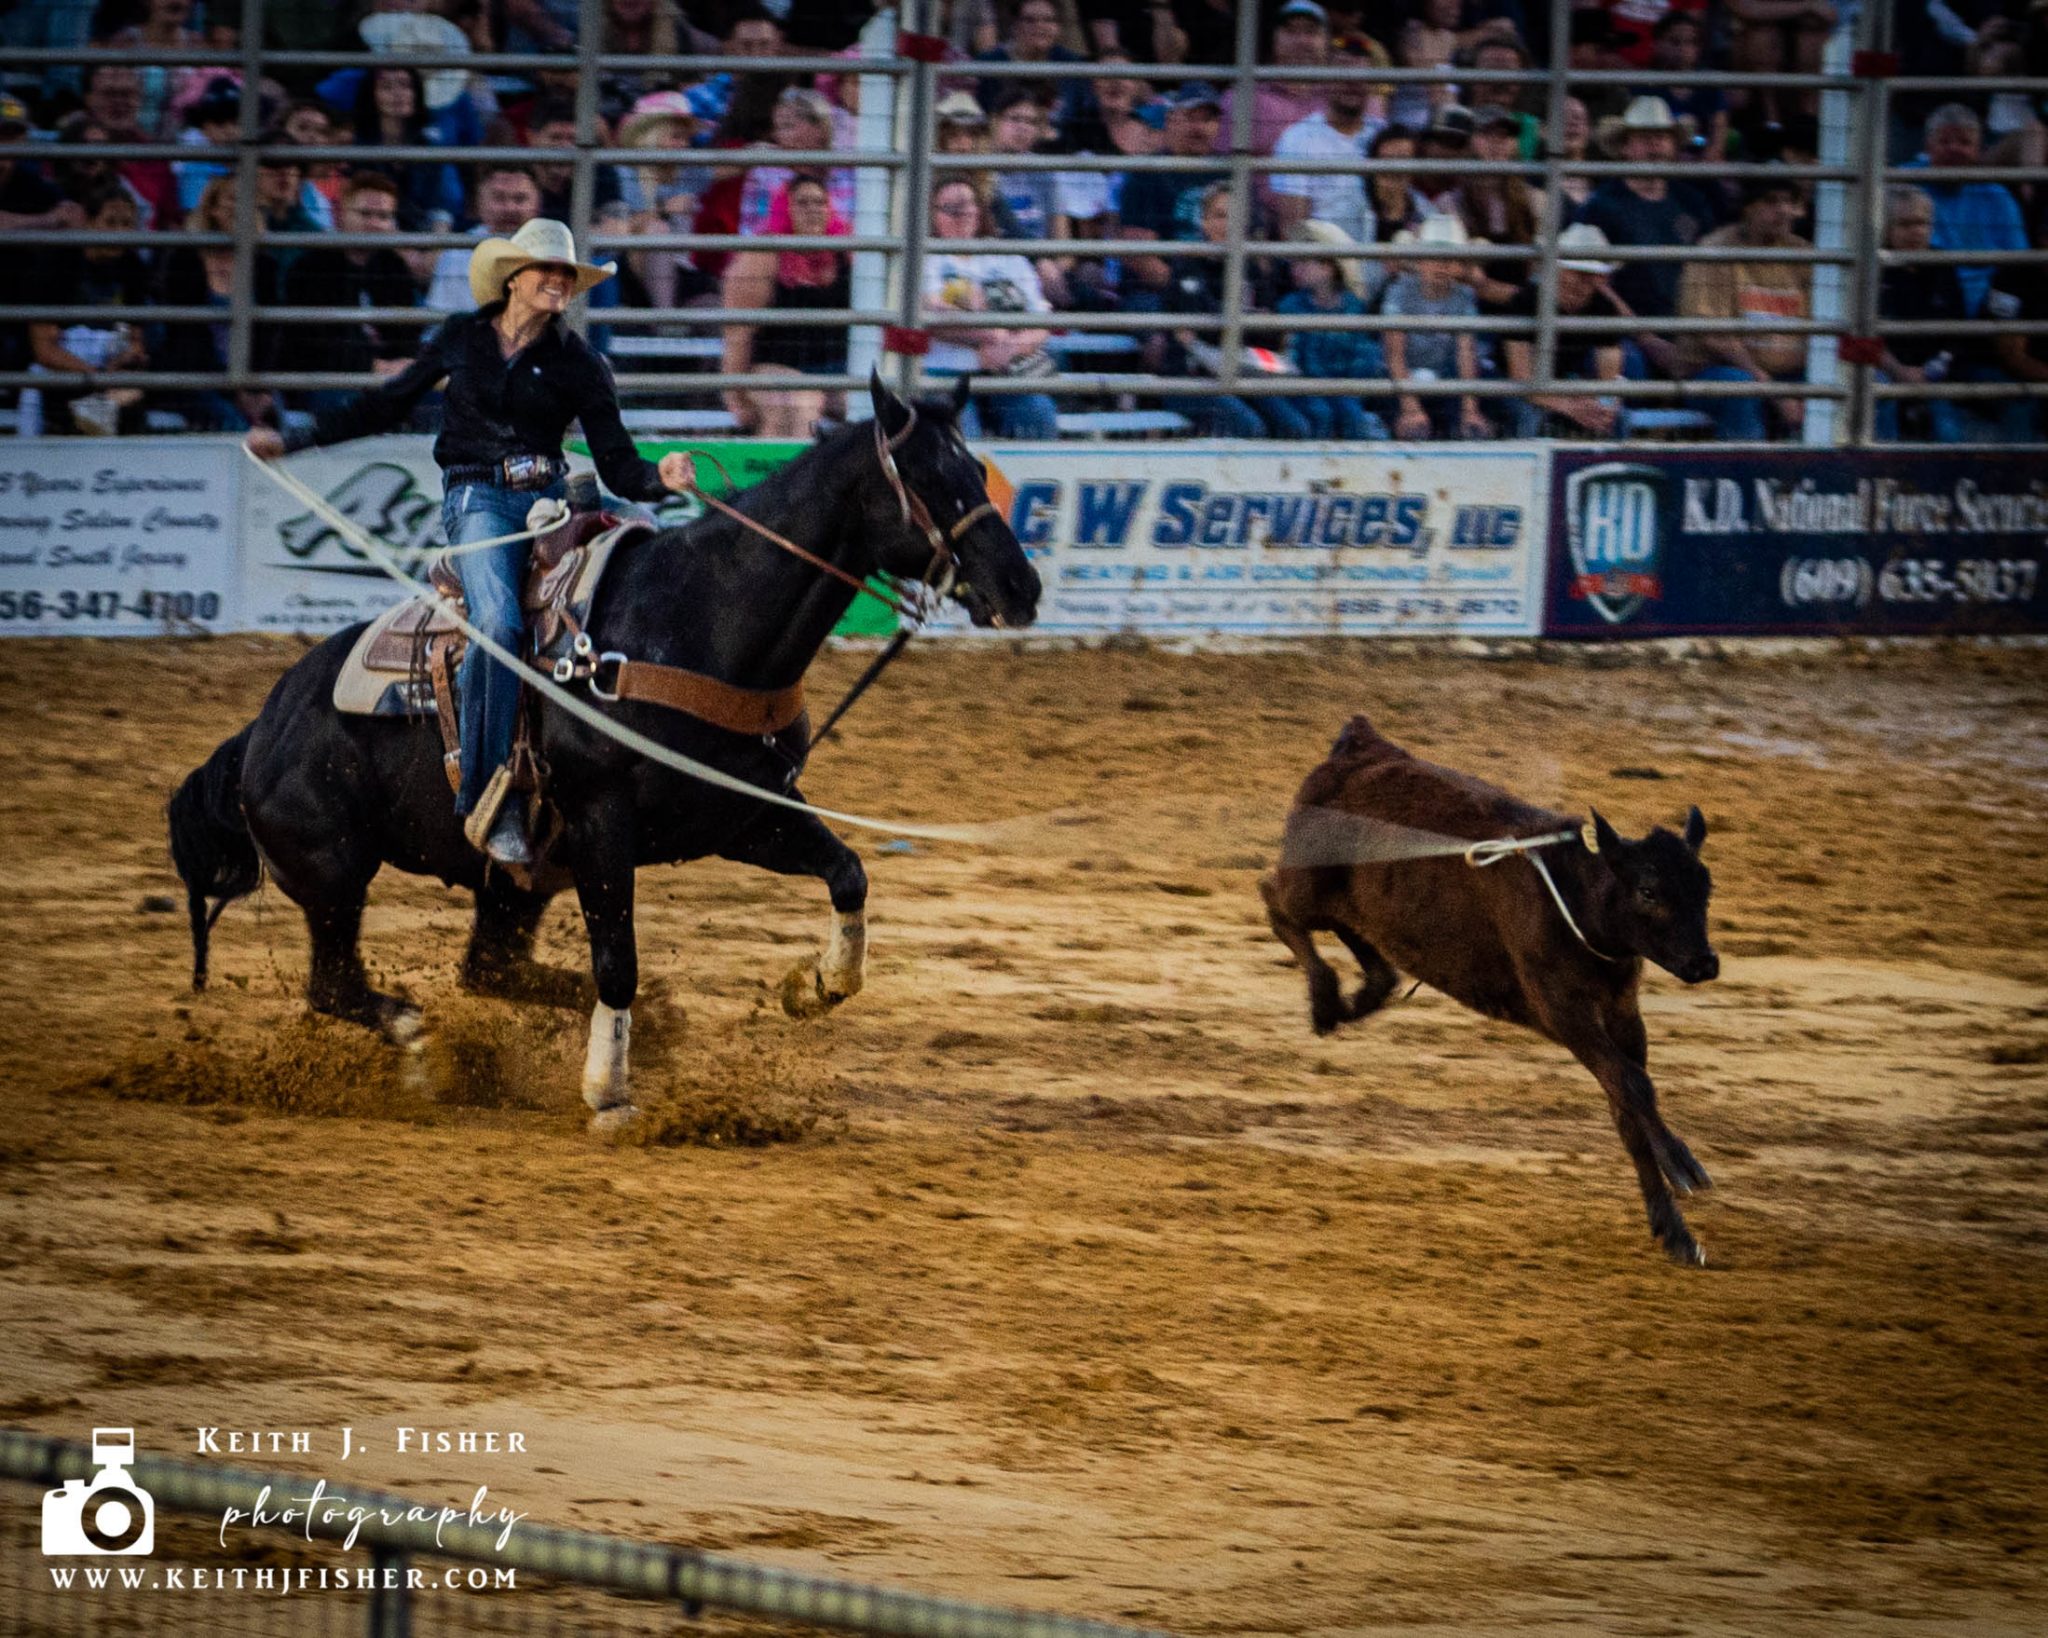 Kelsey King ropes in the breakaway roping at Cowtown Rodeo in New Jersey.